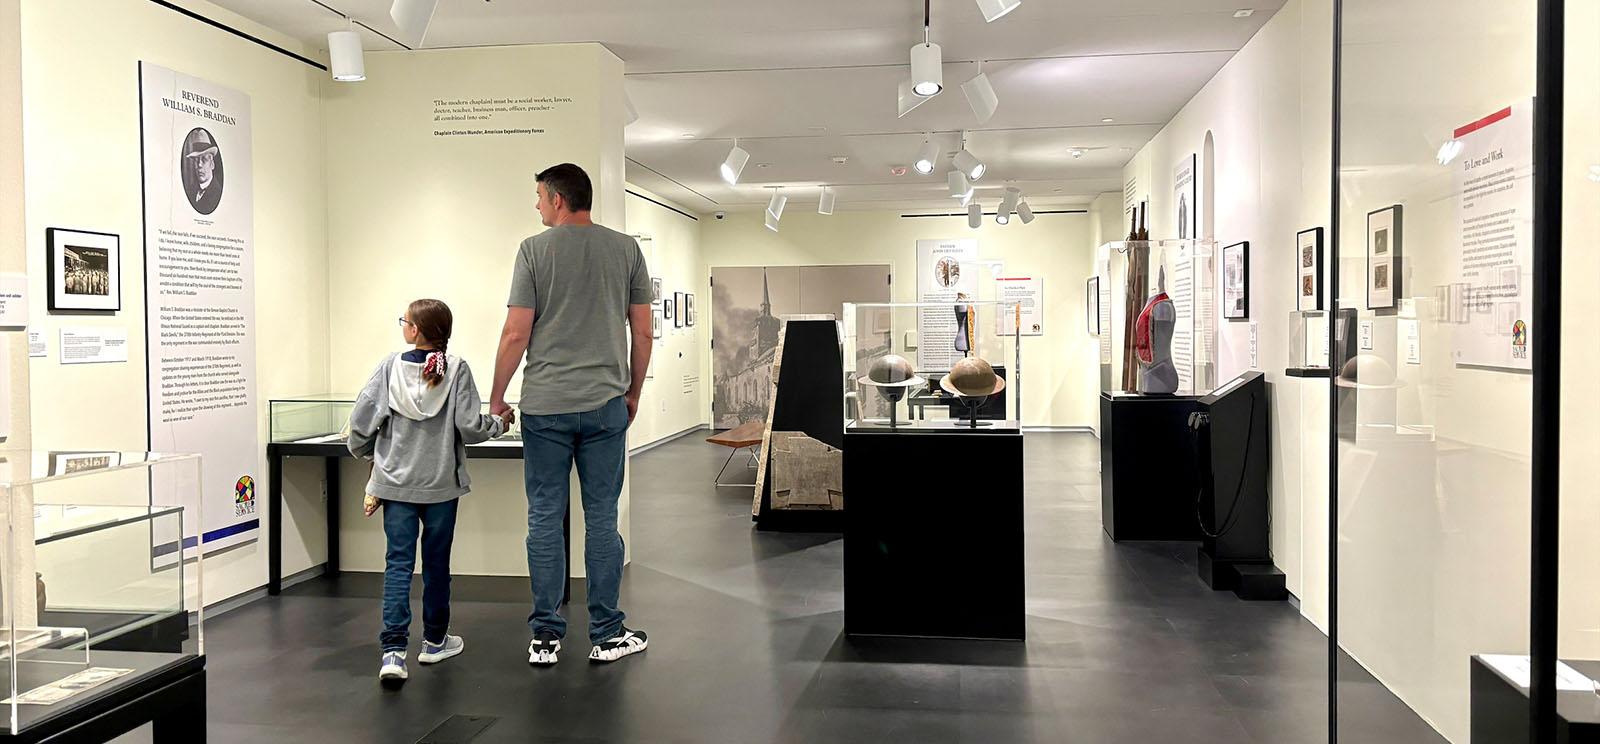 Modern photograph wide shot of a museum gallery. The walls are painted creamy white and the lighting is bright on glass cases displaying artifacts like WWI helmets and religious vestments. Two people are looking at a wall panel of text, facing away from the viewer: a tall white man dressed casually in jeans and t-shirt, holding hands with a young white girl in jeans and a hoodie.